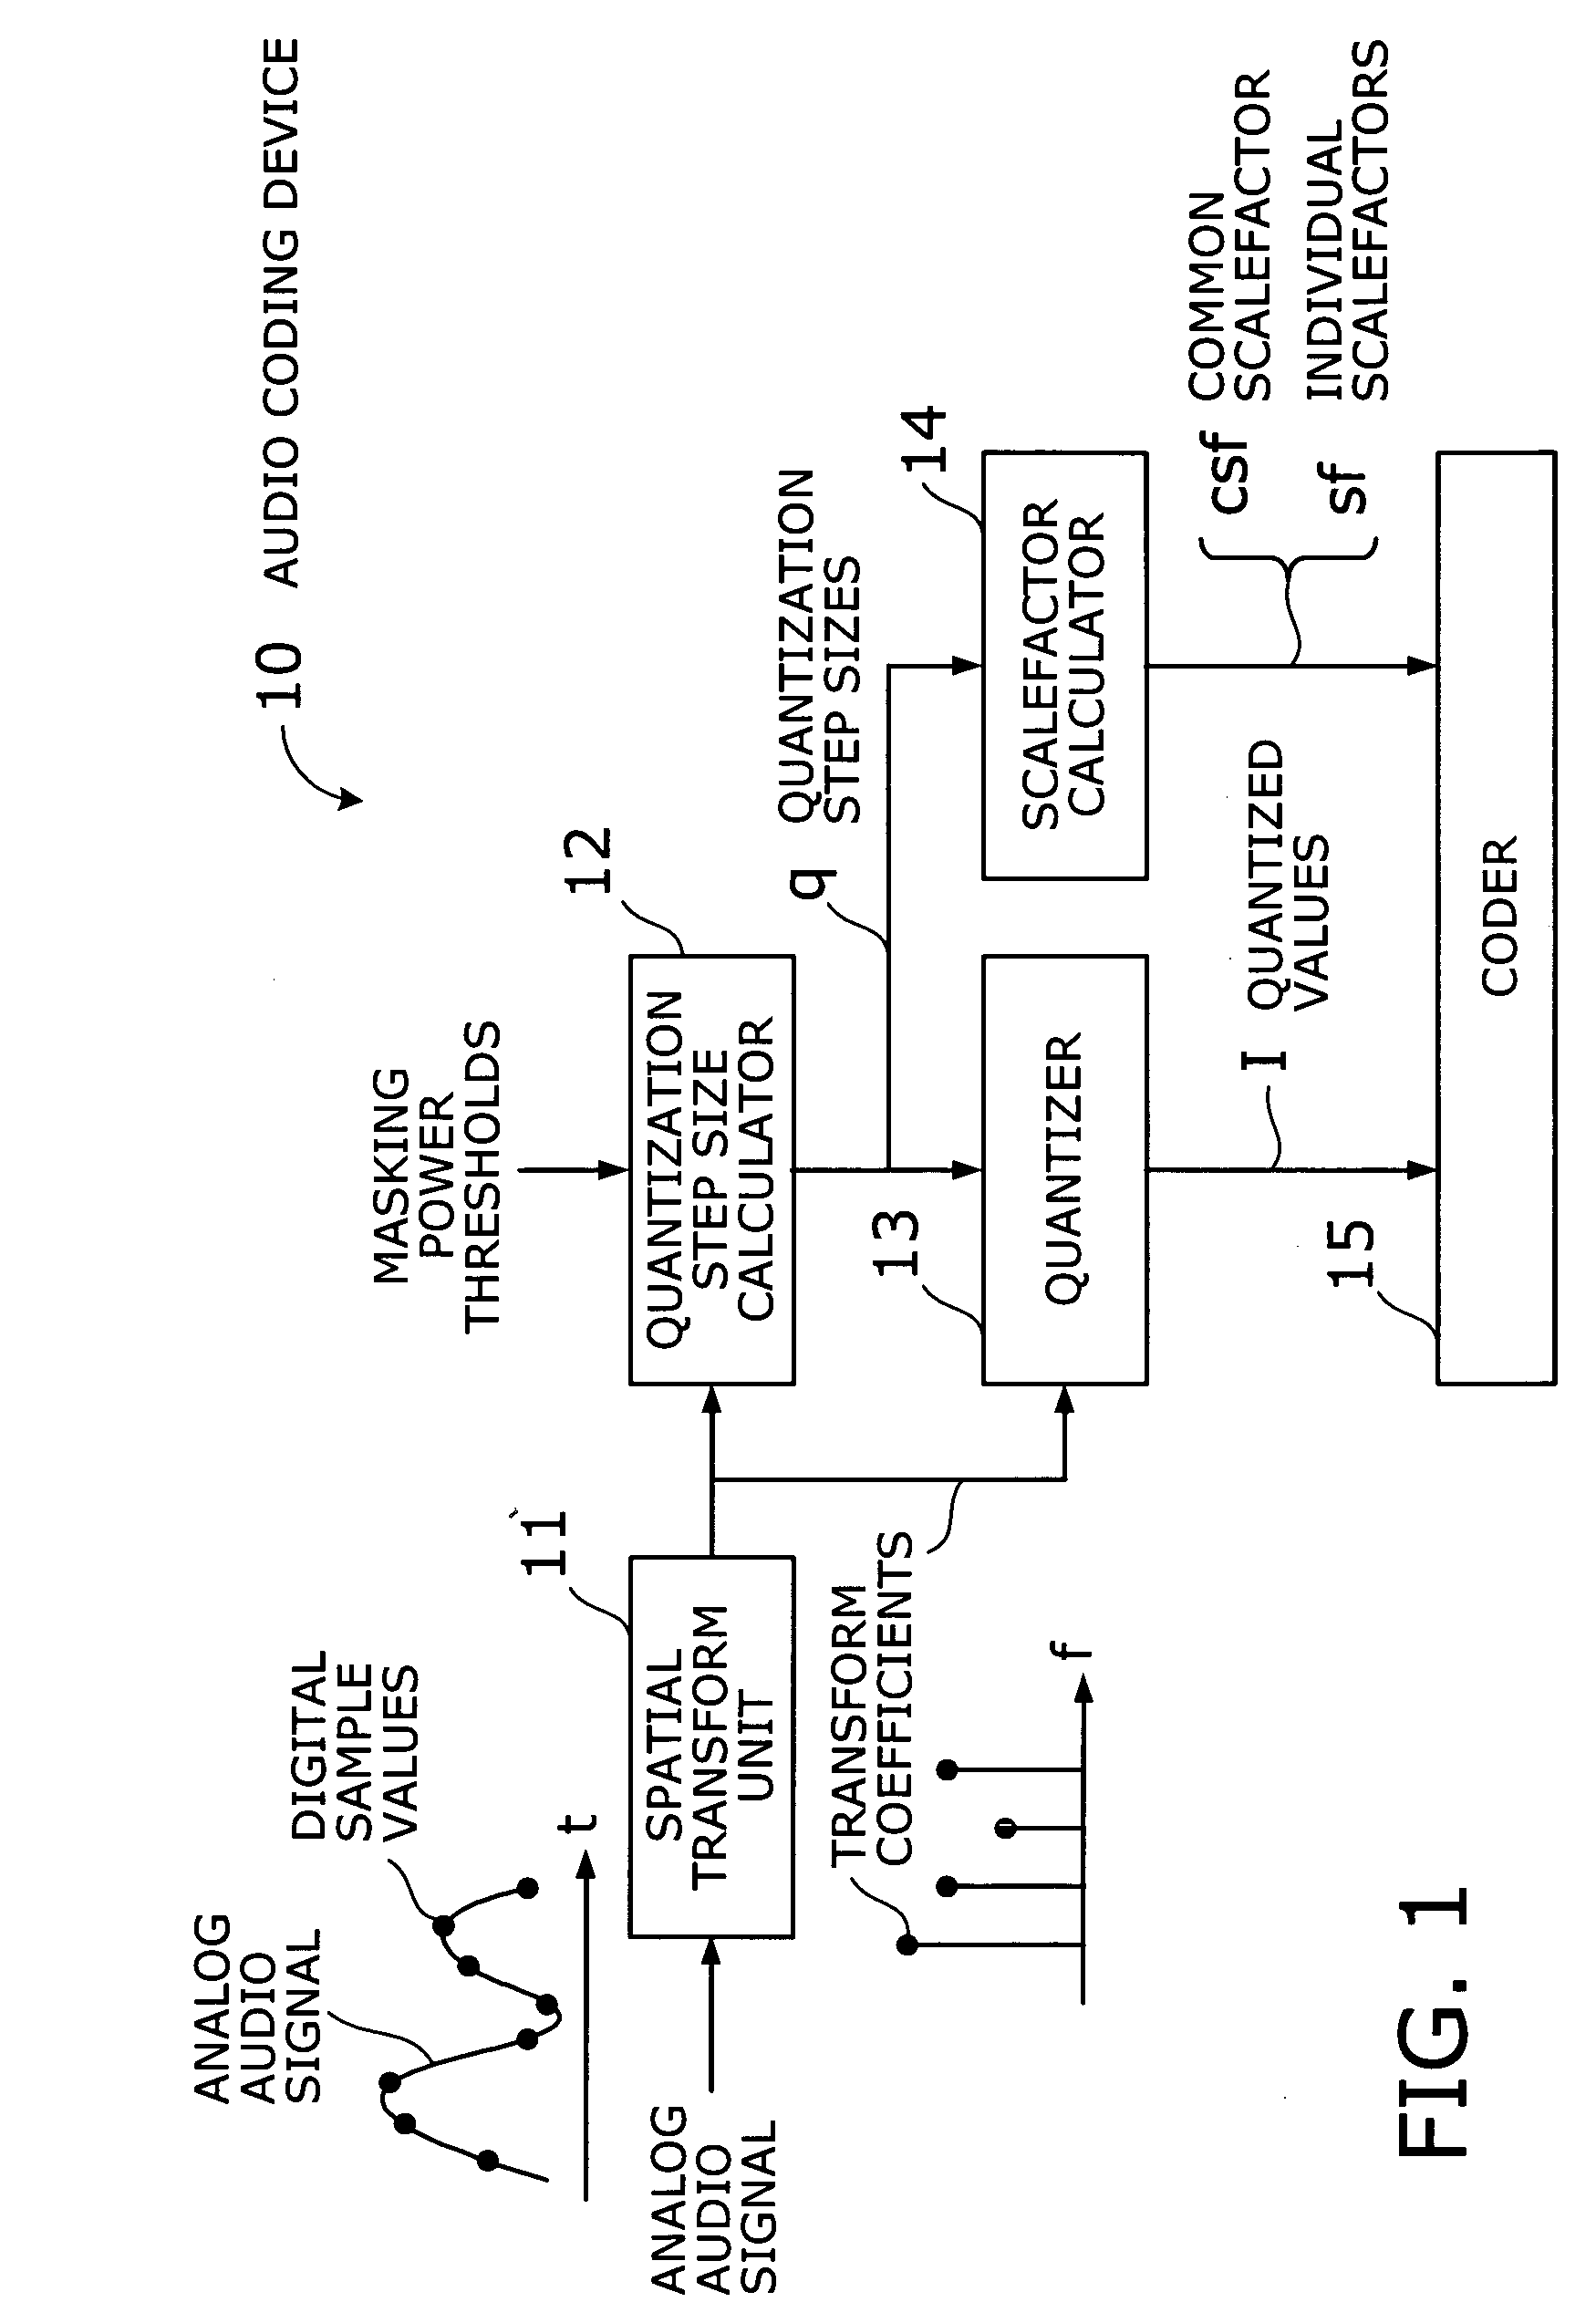 Audio coding device with fast algorithm for determining quantization step sizes based on psycho-acoustic model